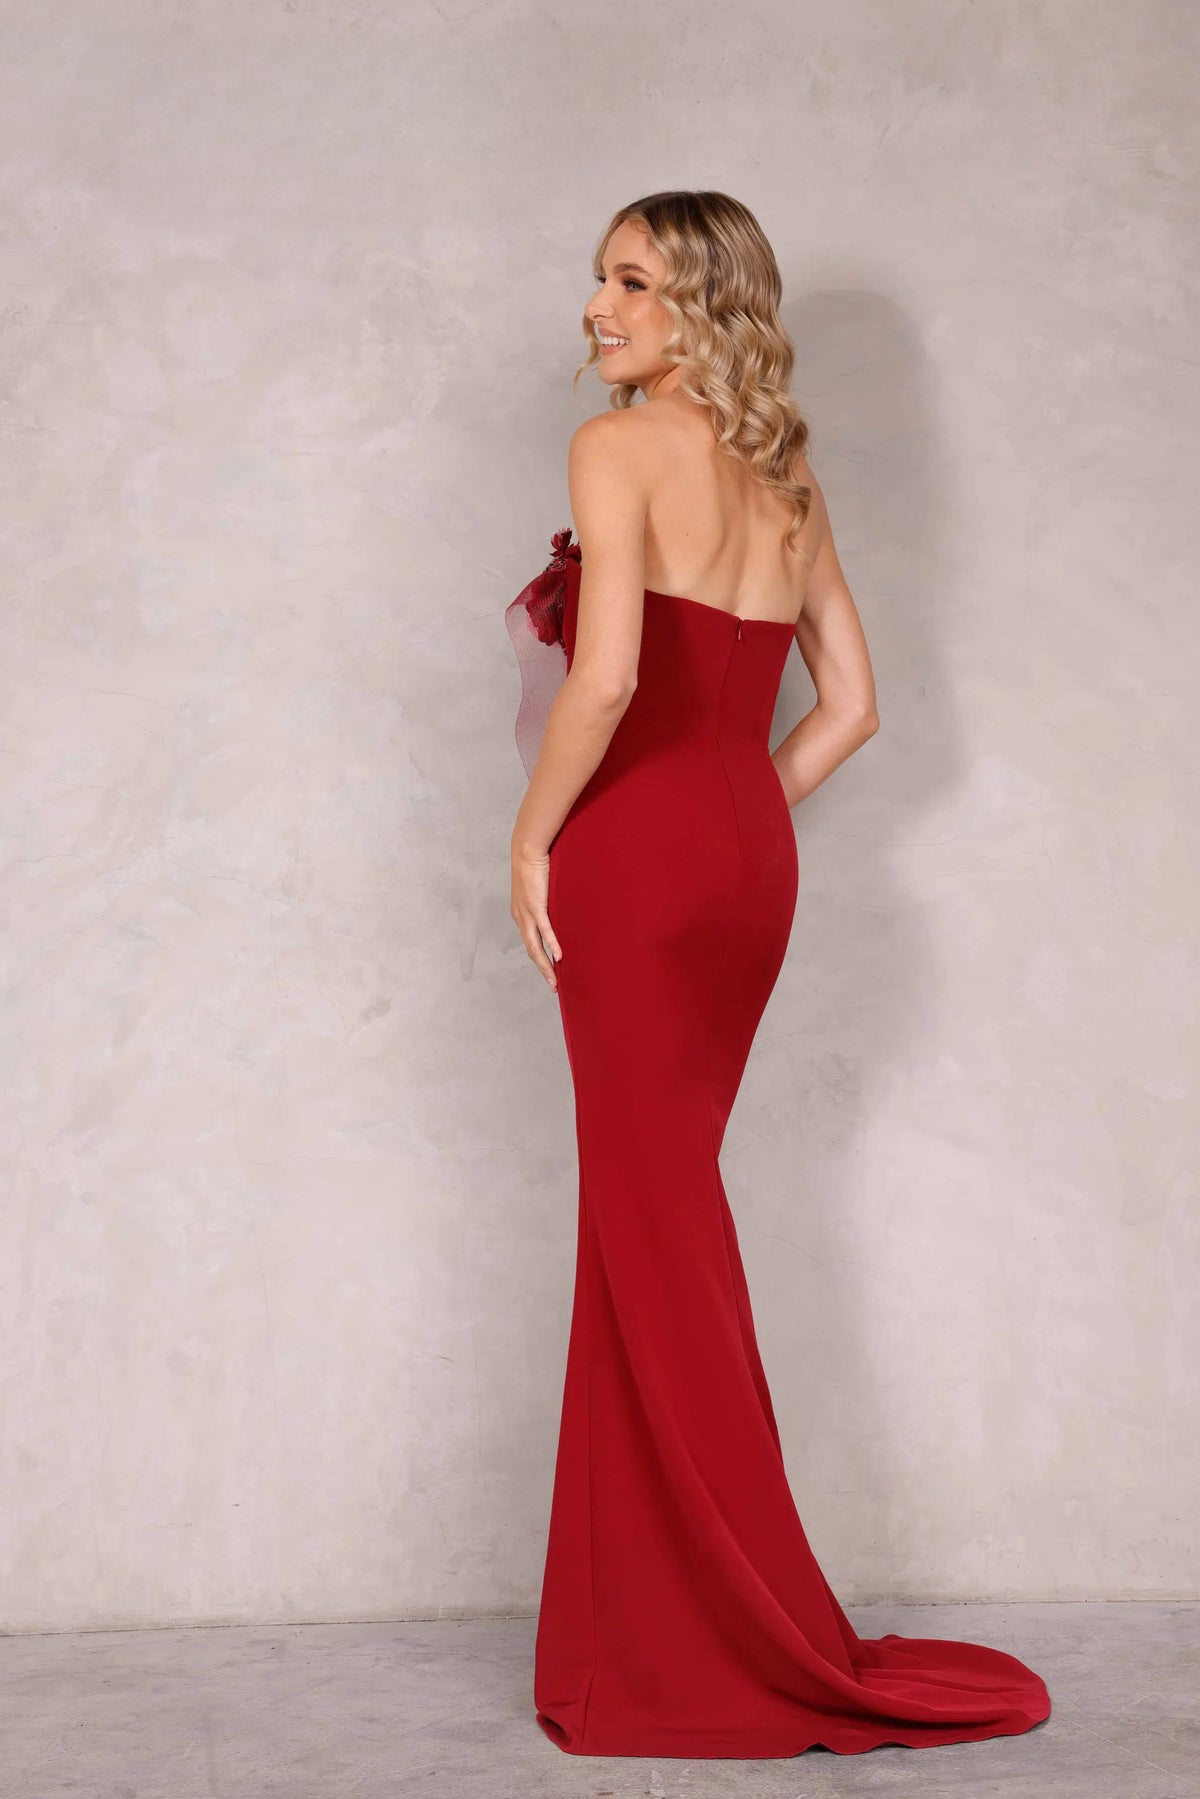 Gorgeous strapless column dress by Terani Couture, style number 2021E2818, adorned with sculpted horsehair and 3D flowers. Available at Madeline's in Toronto, Canada, and Boca Raton, Florida.